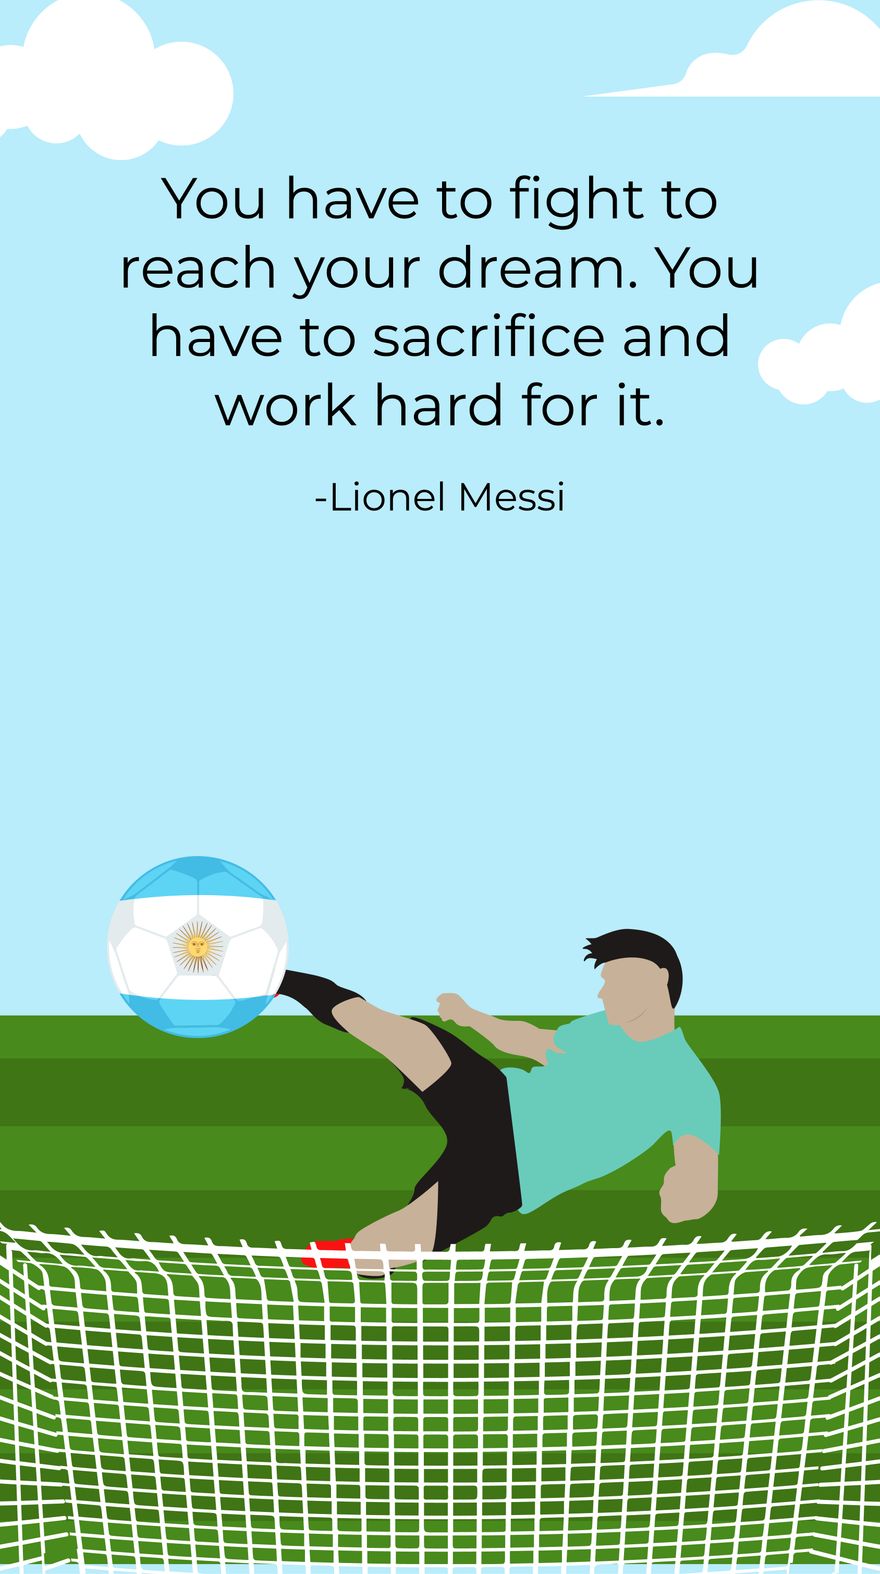 Lionel Messi - You have to fight to reach your dream. You have to sacrifice and work hard for it.